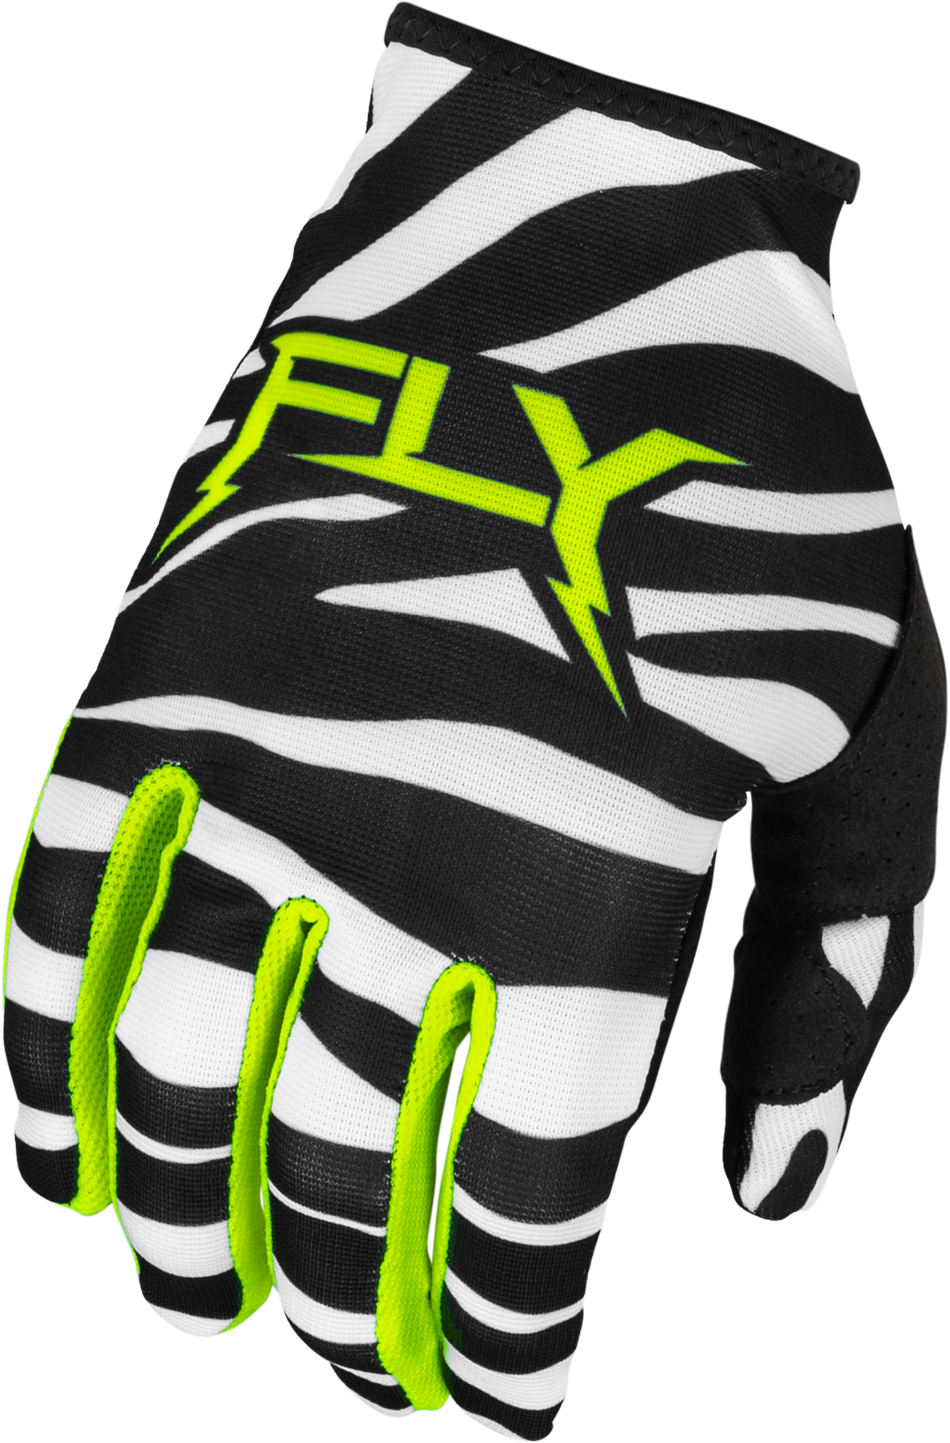 FLY RACING Lite Uncaged Gloves Black/White/Neon Green Sm 377-742S